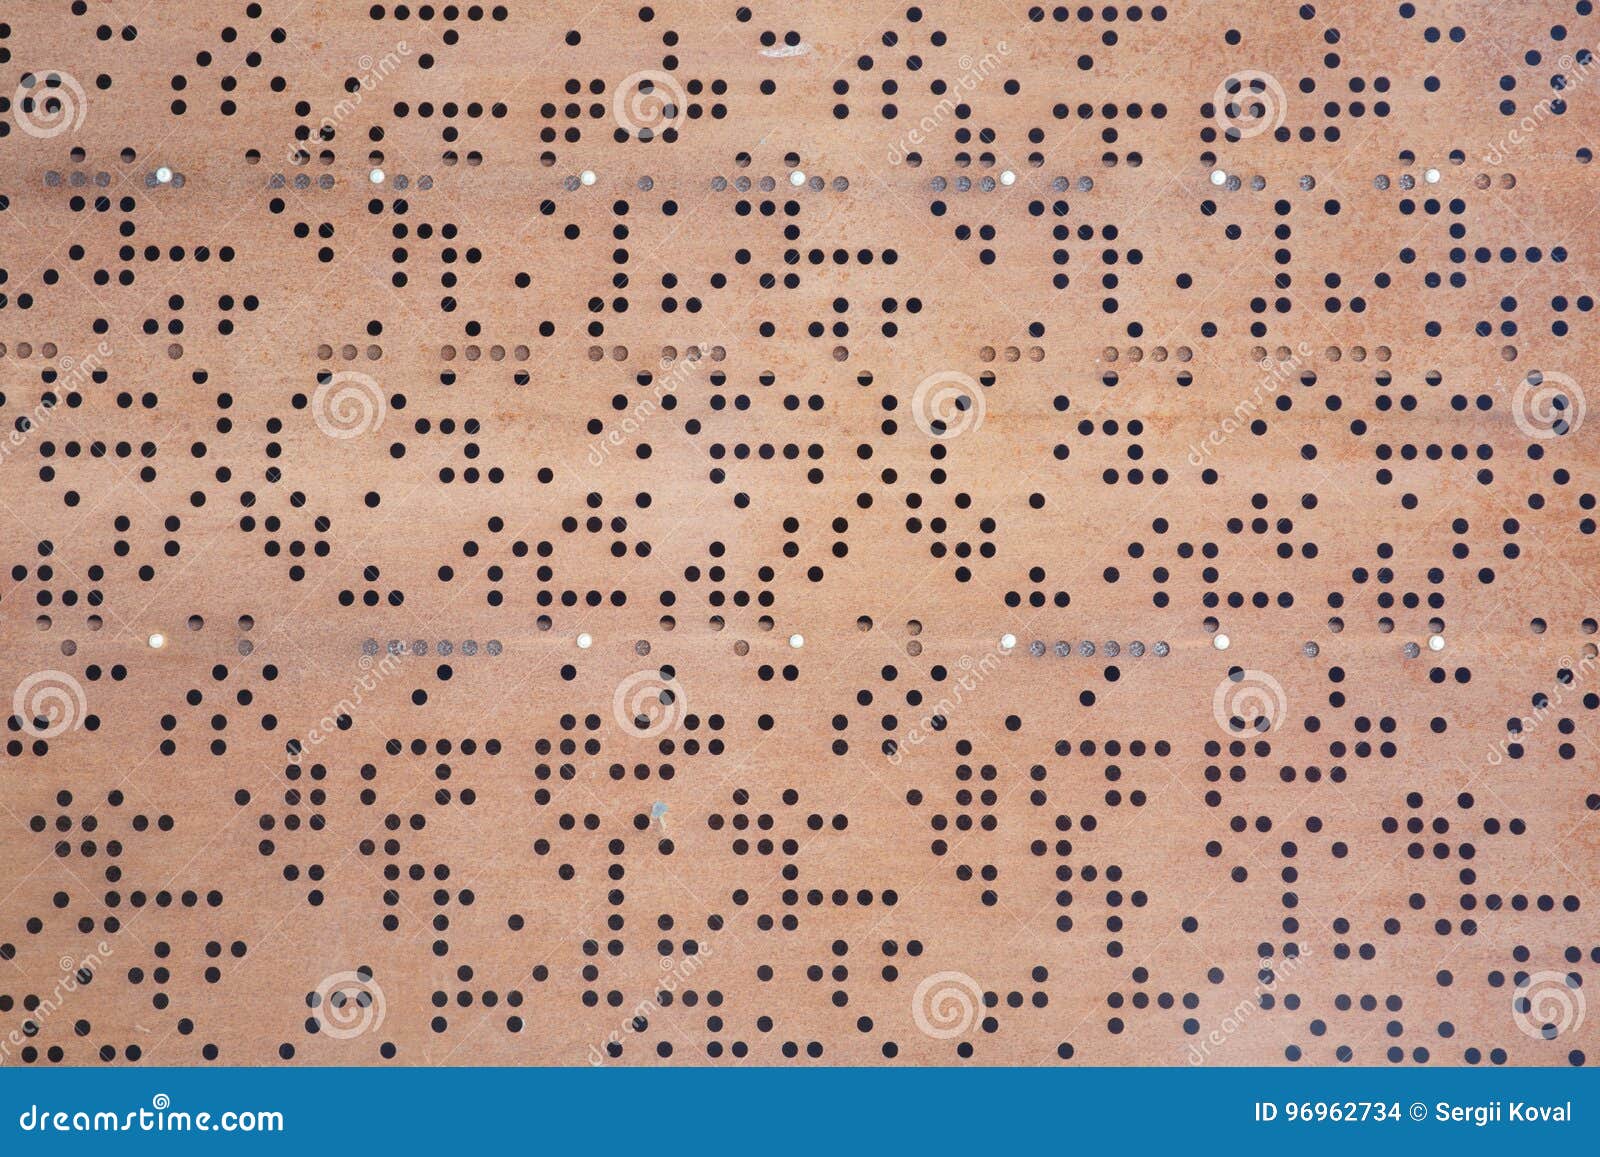 Circle Perforated Metal Panel For Texture And Background Stock Photo Image Of Rusty Material